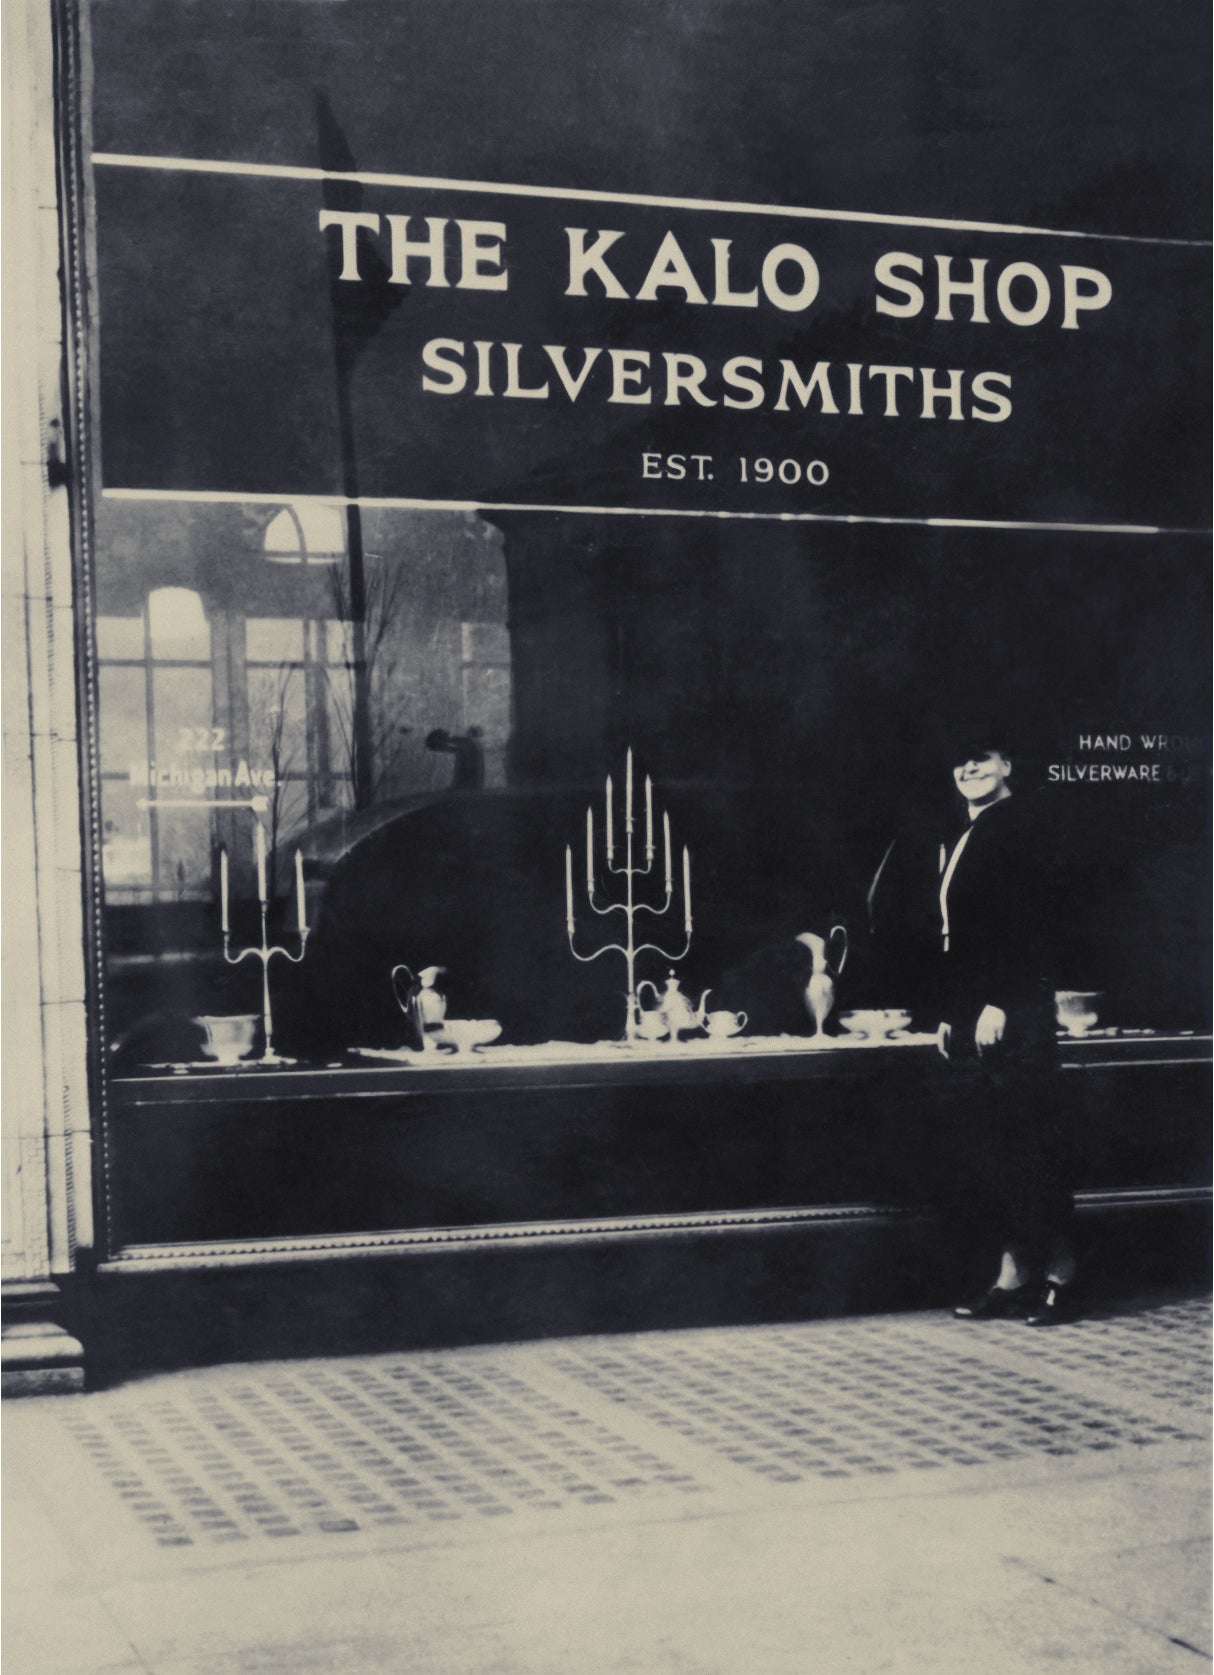 Clara Barck Welles standing by the Kalo Shop window  1937 Chicago  Sharon S. Darling Collection, gift of Robert R. Bower R2023.0203.001